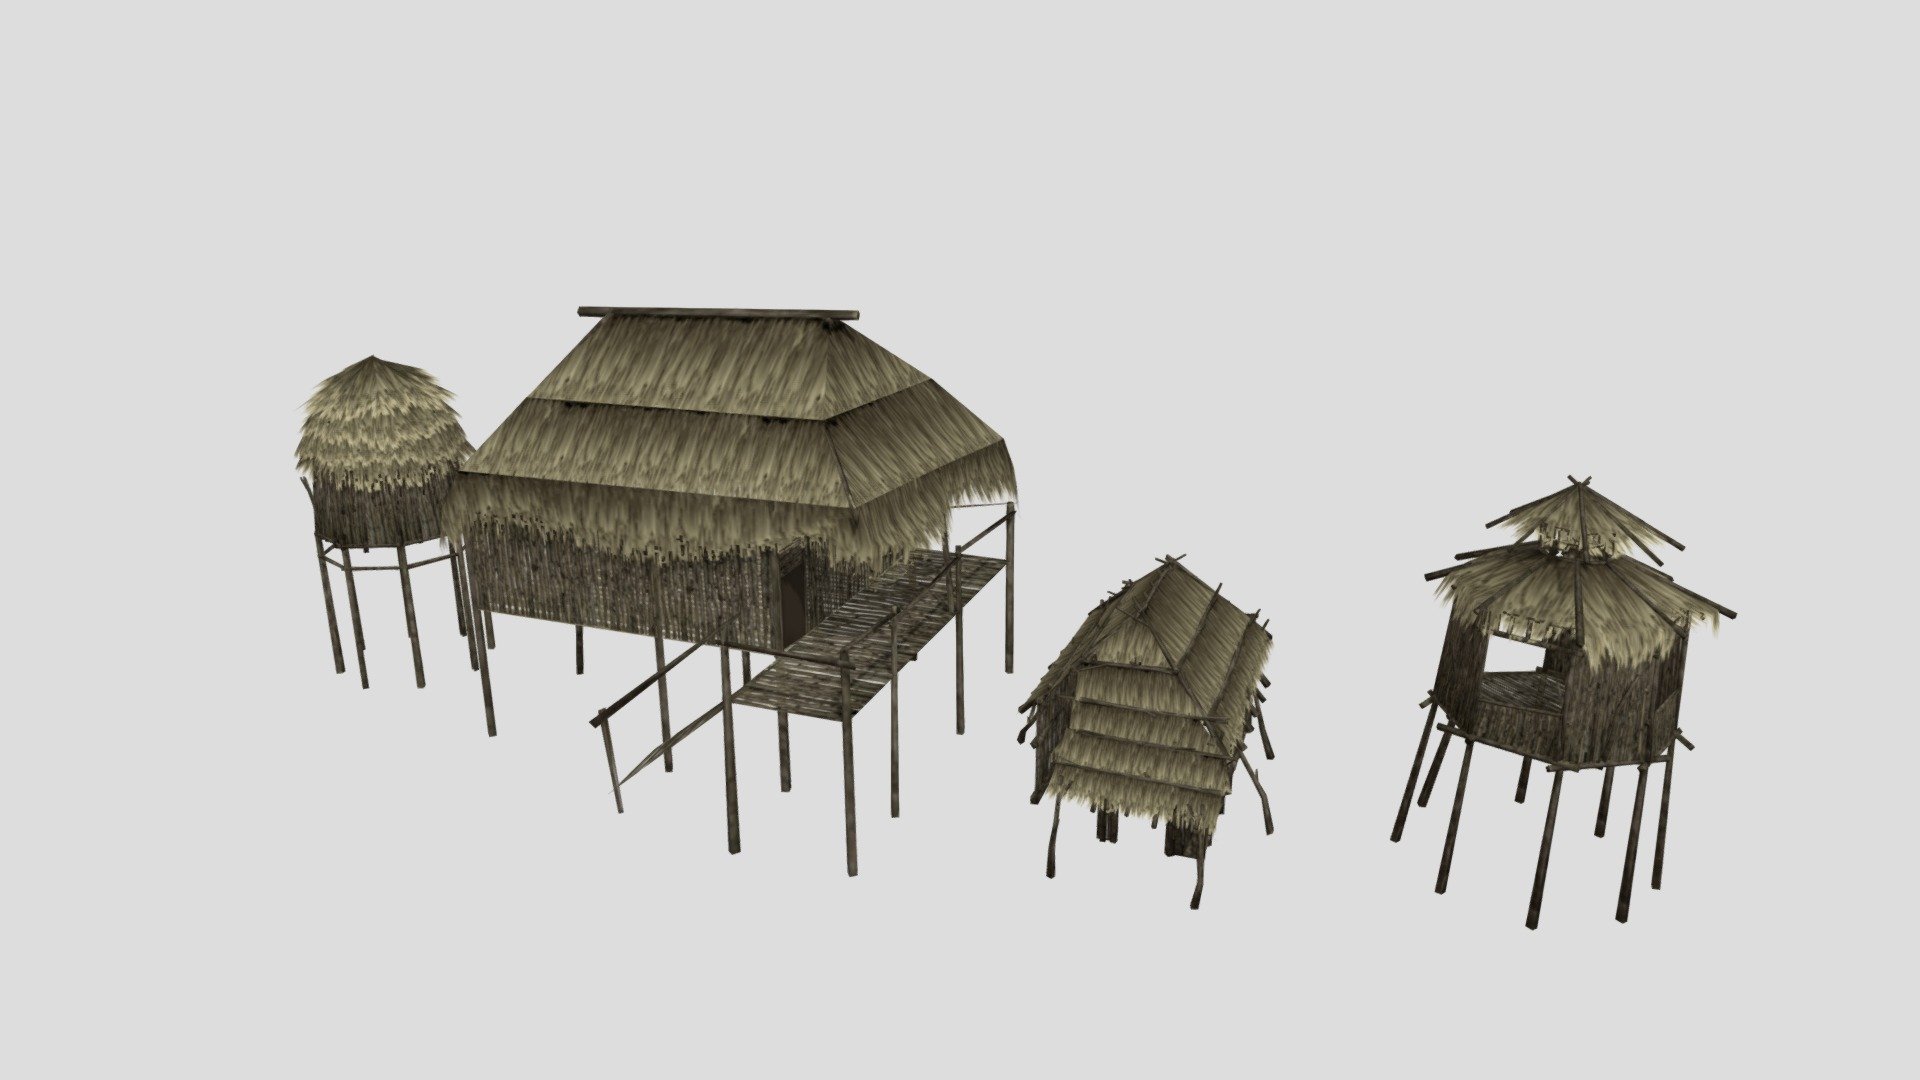 Bamboo Huts
The model has an optimized low poly mesh with the greatest possible number of simplifications that do not affect photo-realism but can help to simplify it, thus lightening your scene and allowing for using this model in real-time 3d applications.

Real-world accurate model.  In this product, all objects are ERROR-FREE and All LEGAL Geometry. Subdivisions are not required for this product.

Perfect for Architectural, Product visualization, Game Engine, and VR (Virtual Reality) No Plugin Needed.

Format Type




3ds Max 2017 (standard shader)

FBX

OBJ

3DS

Texture

1 material used. 1 different sets of textures:




Diffuse with alpha

Normal

You might need to re-assign textures map to model in your relevant software - Bamboo Huts - Buy Royalty Free 3D model by luxe3dworld 3d model